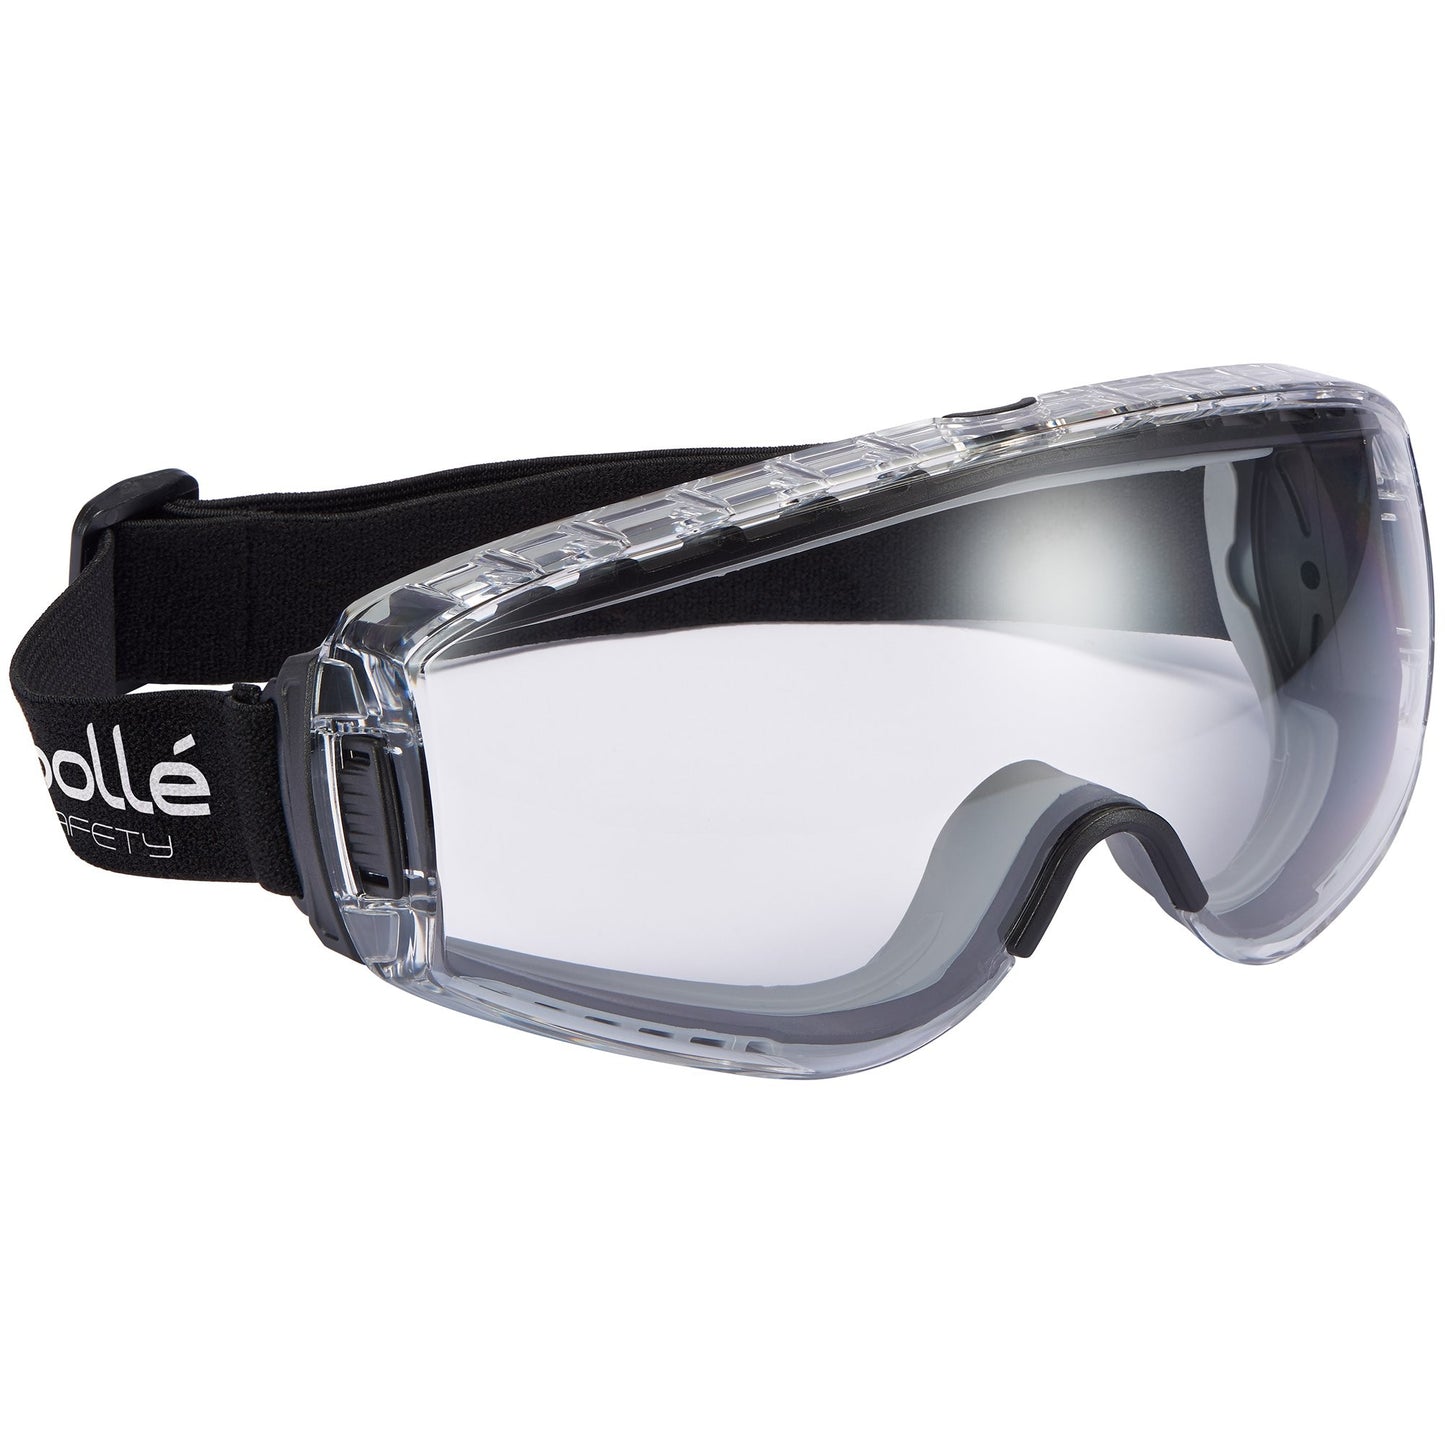 Bolle Safety Goggles - Bolle Pilot